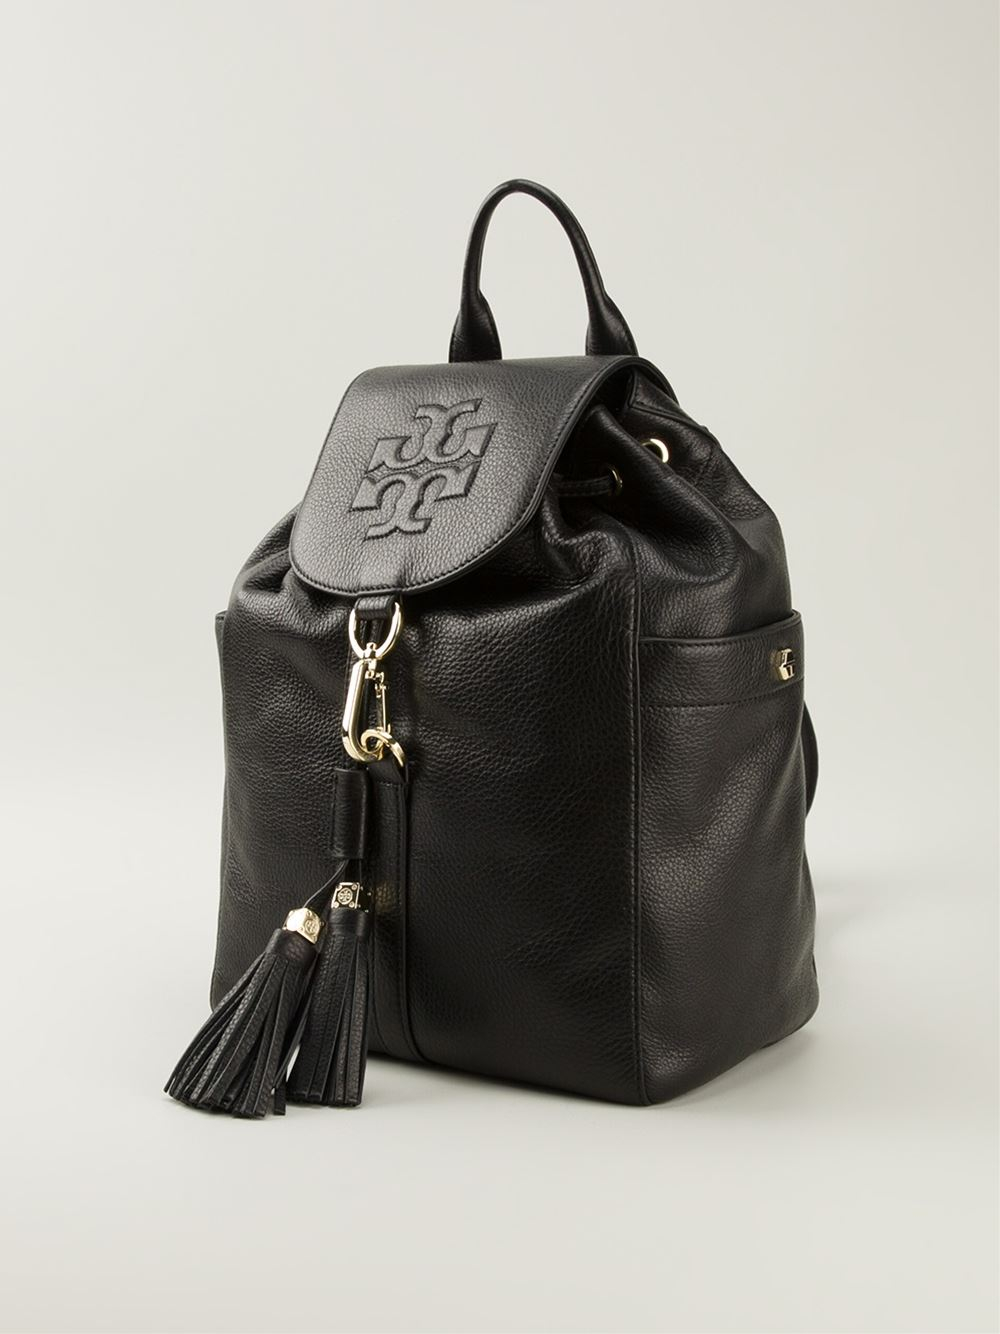 Tory burch Thea Backpack in Black | Lyst